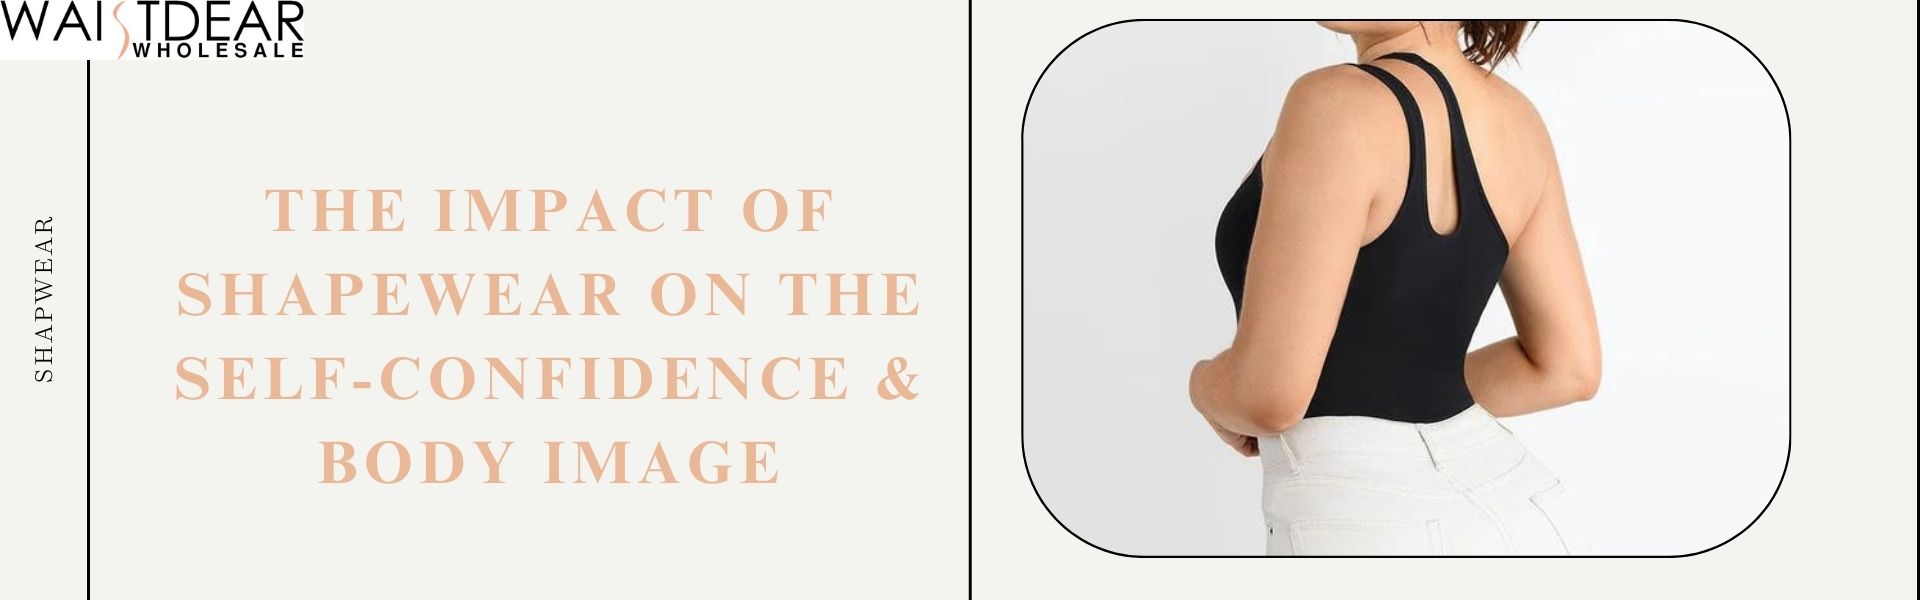 The Impact of Shapewear on The Self-confidence & Body Image